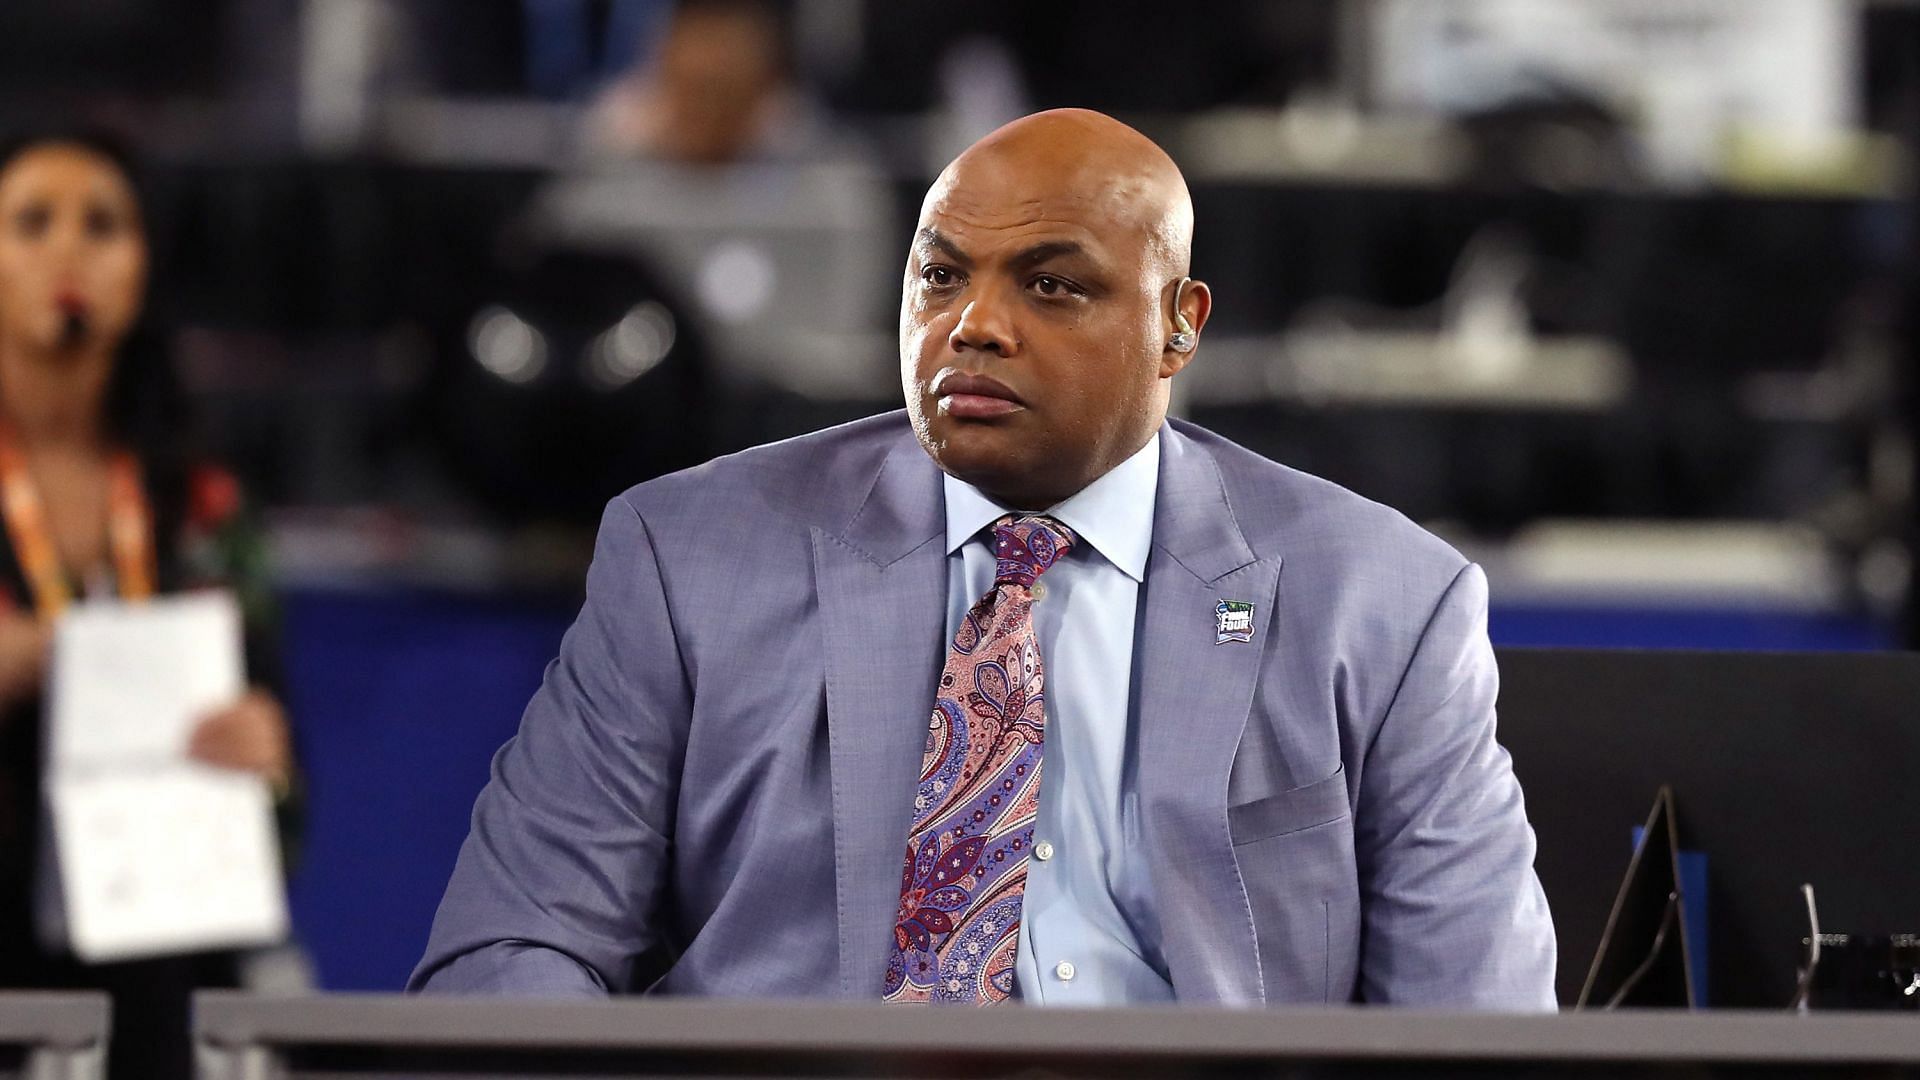 Charles Barkley thinks the new CBA could present some challenges for the NBA players